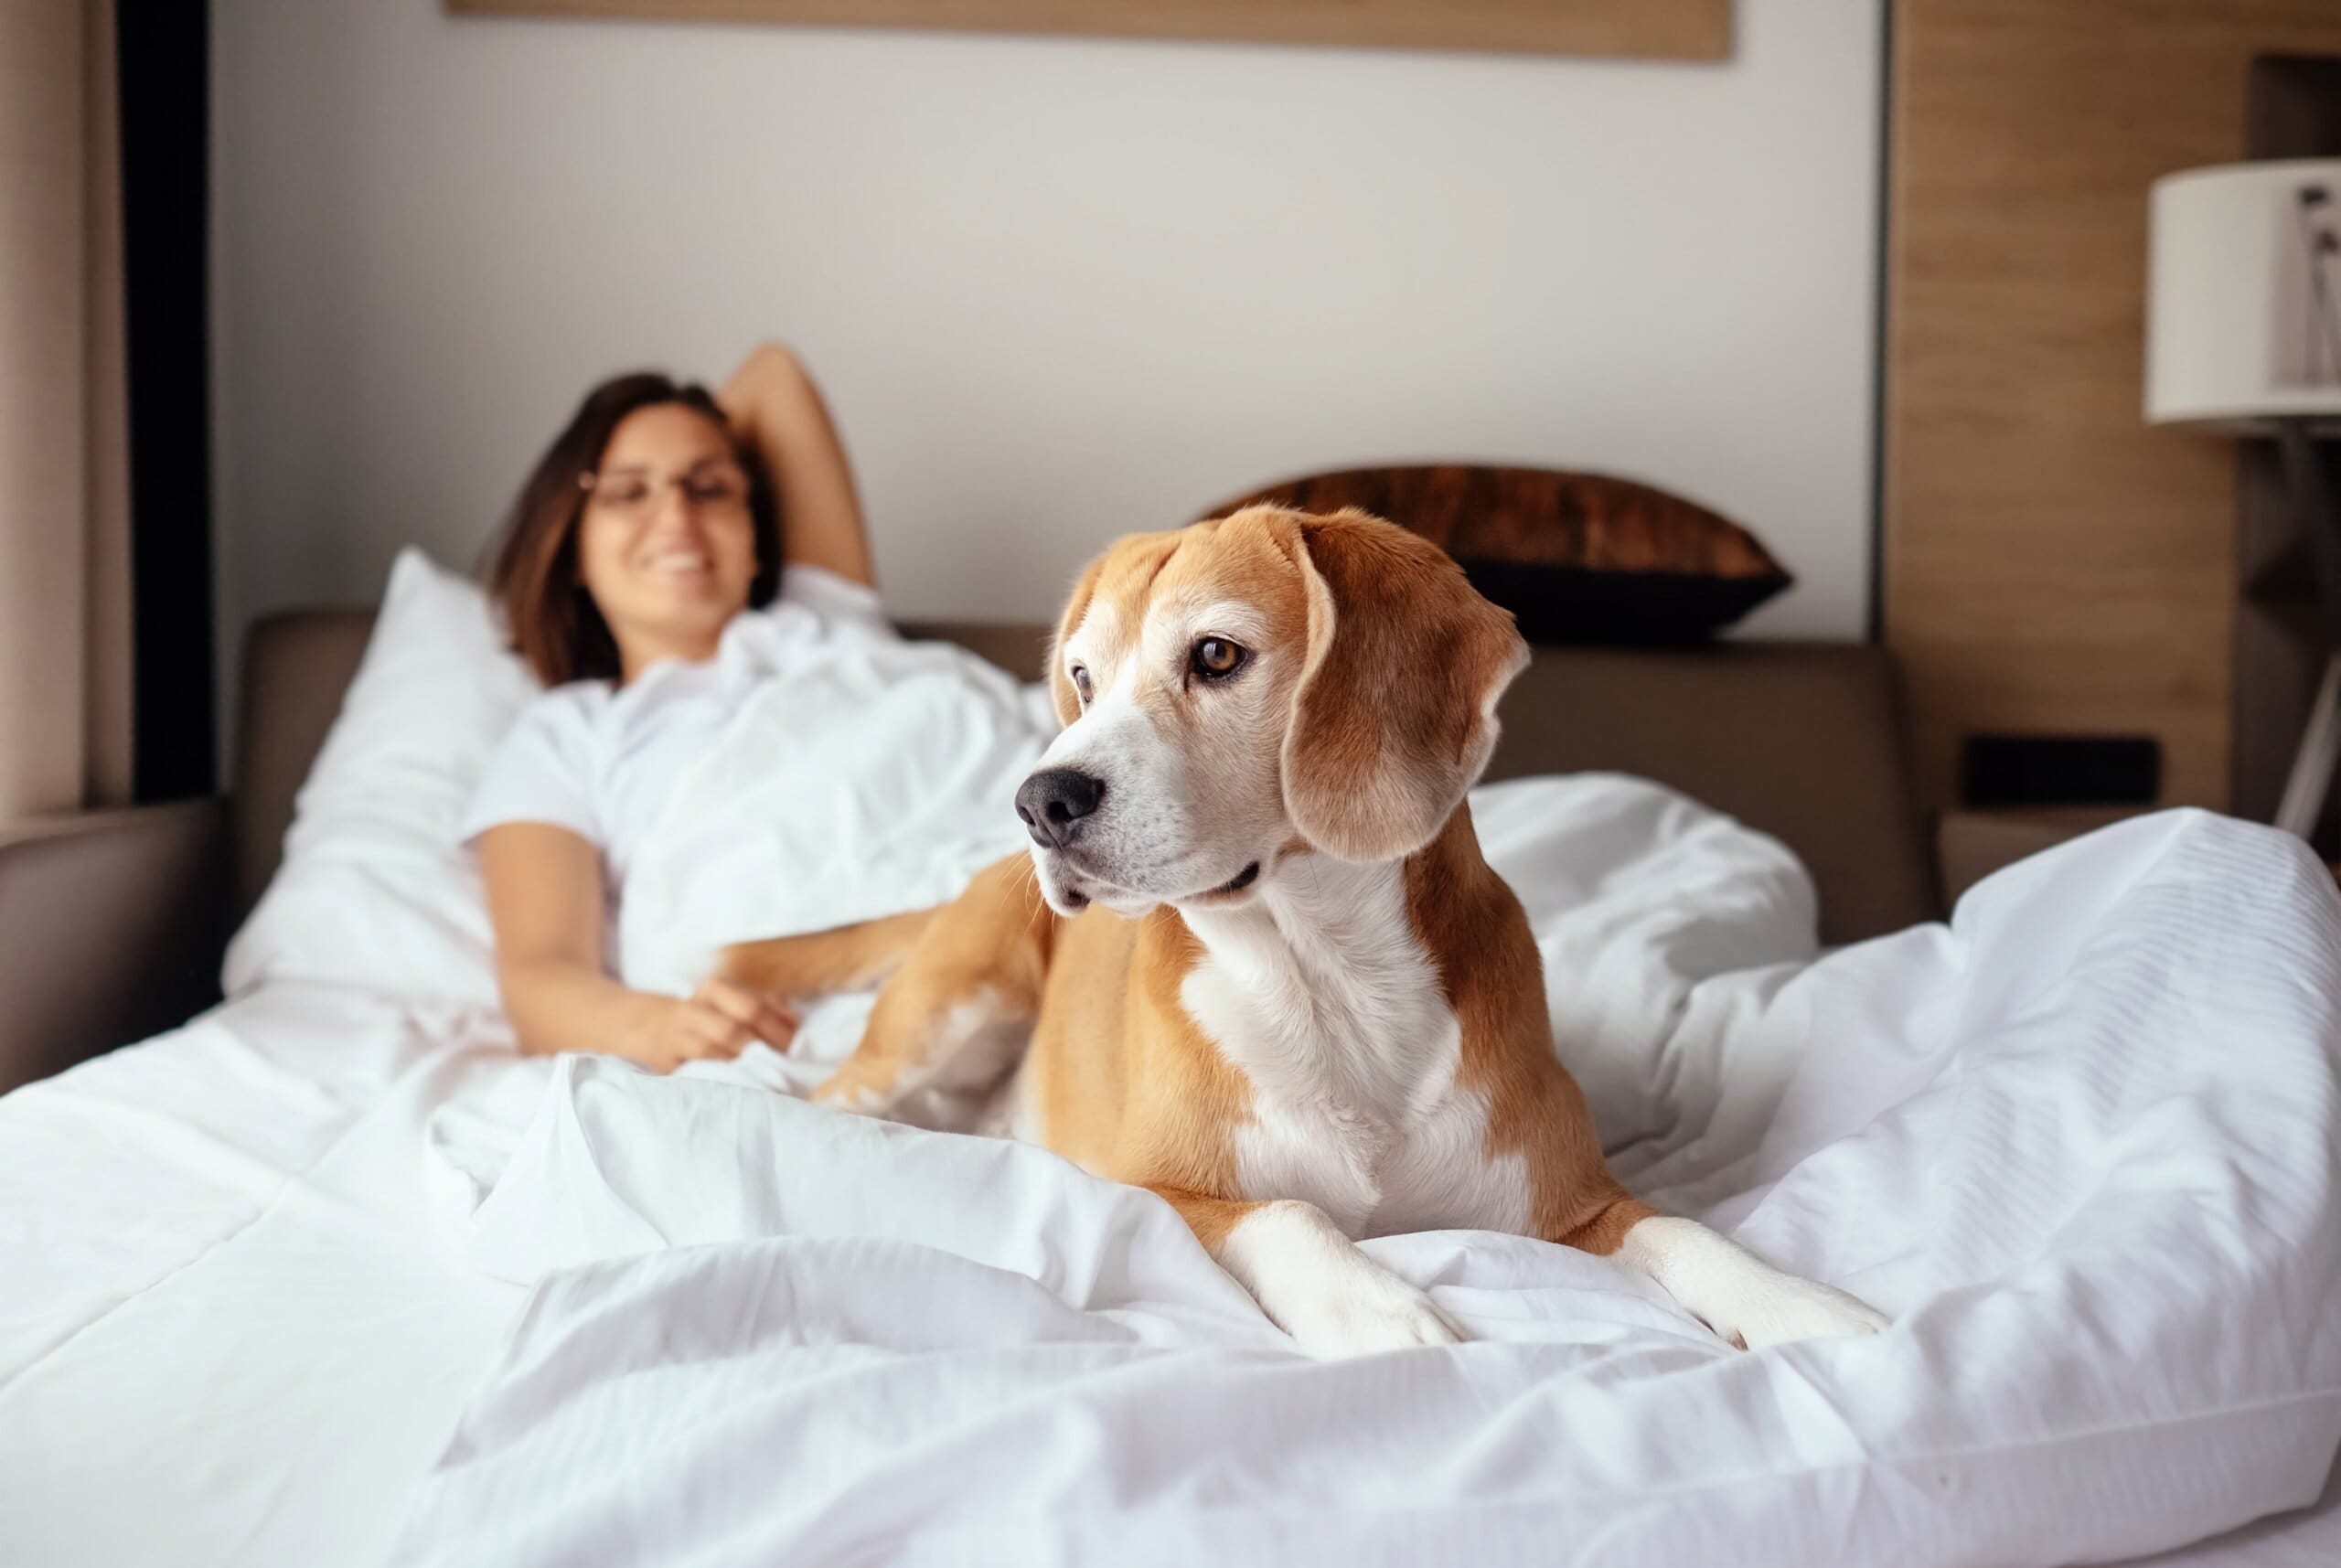 Woman lying in bed with her pet beagle in the foreground.